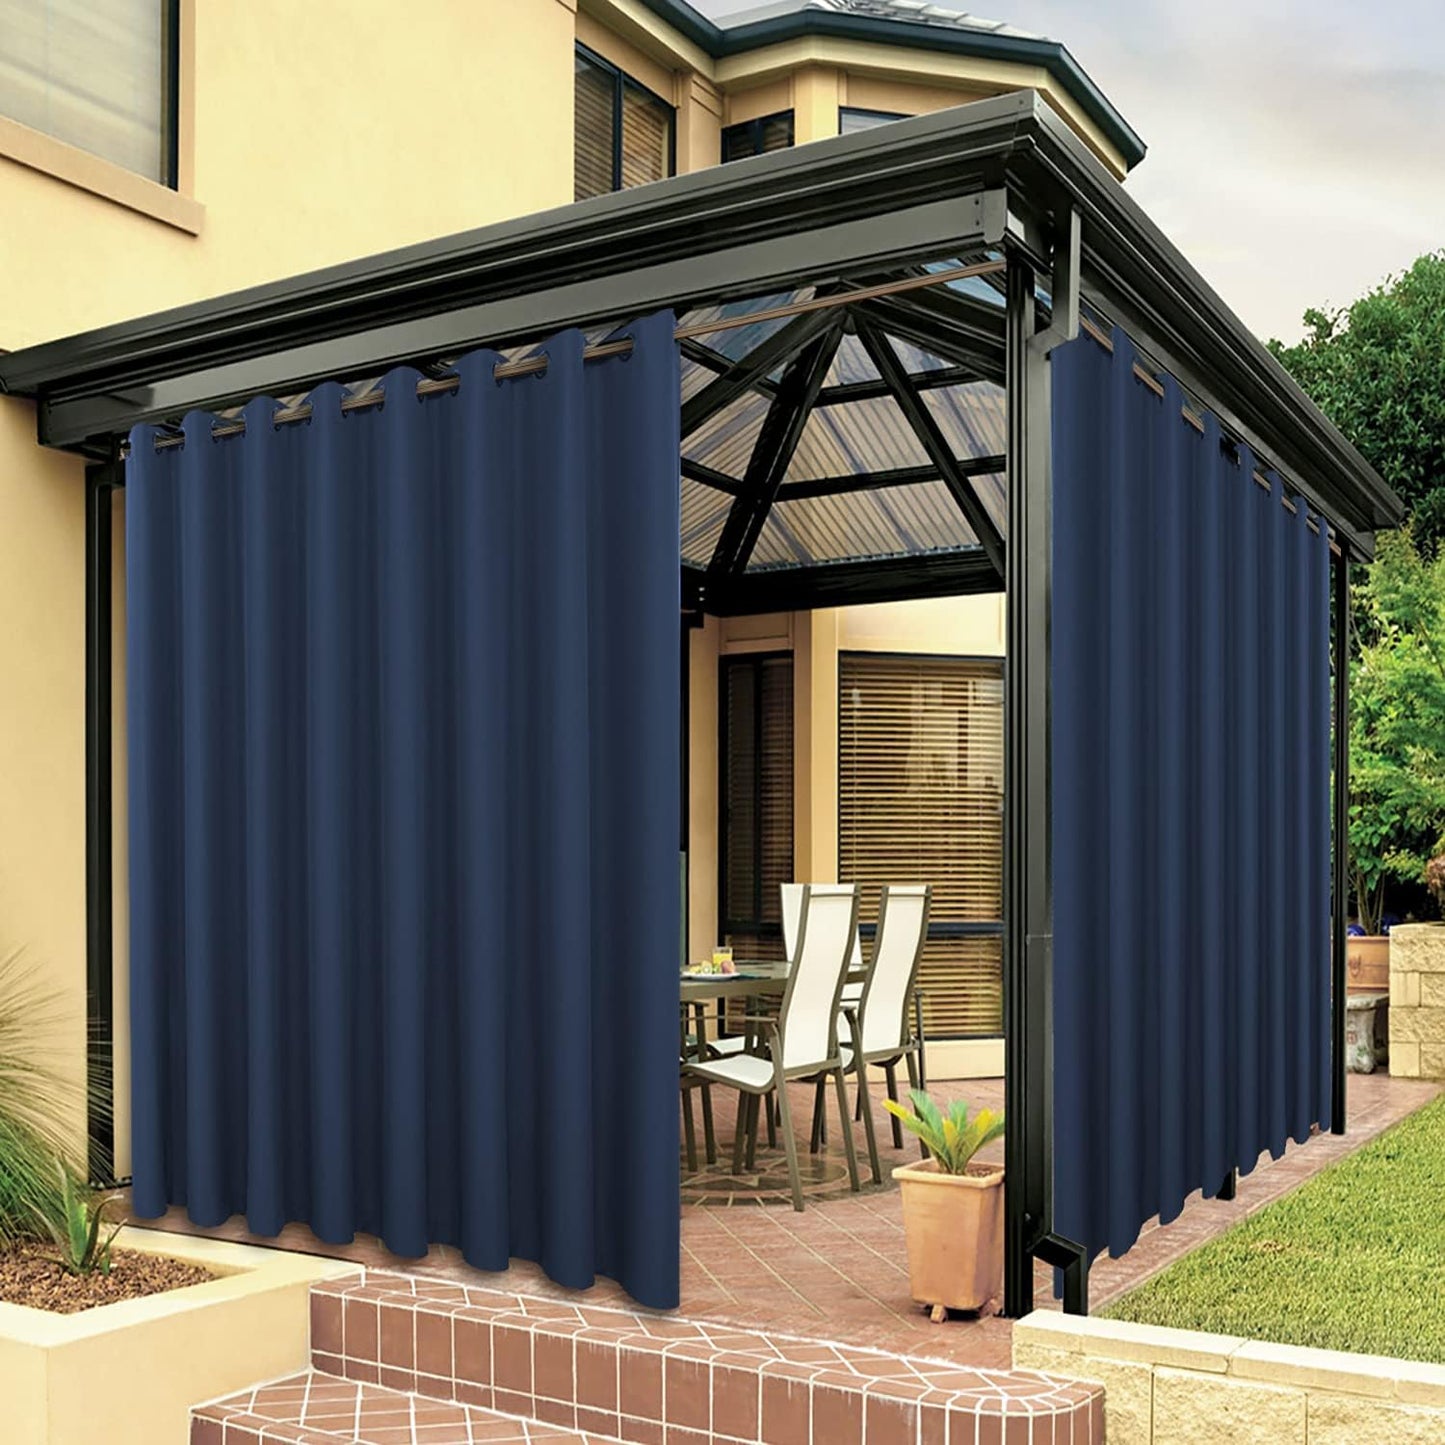 BONZER Outdoor Curtains for Patio Waterproof, Premium Thick Privacy Weatherproof Grommet outside Curtains for Porch, Gazebo, Deck, 1 Panel, 54W X 84L Inch, White  BONZER Navy 150W X 95L Inch 